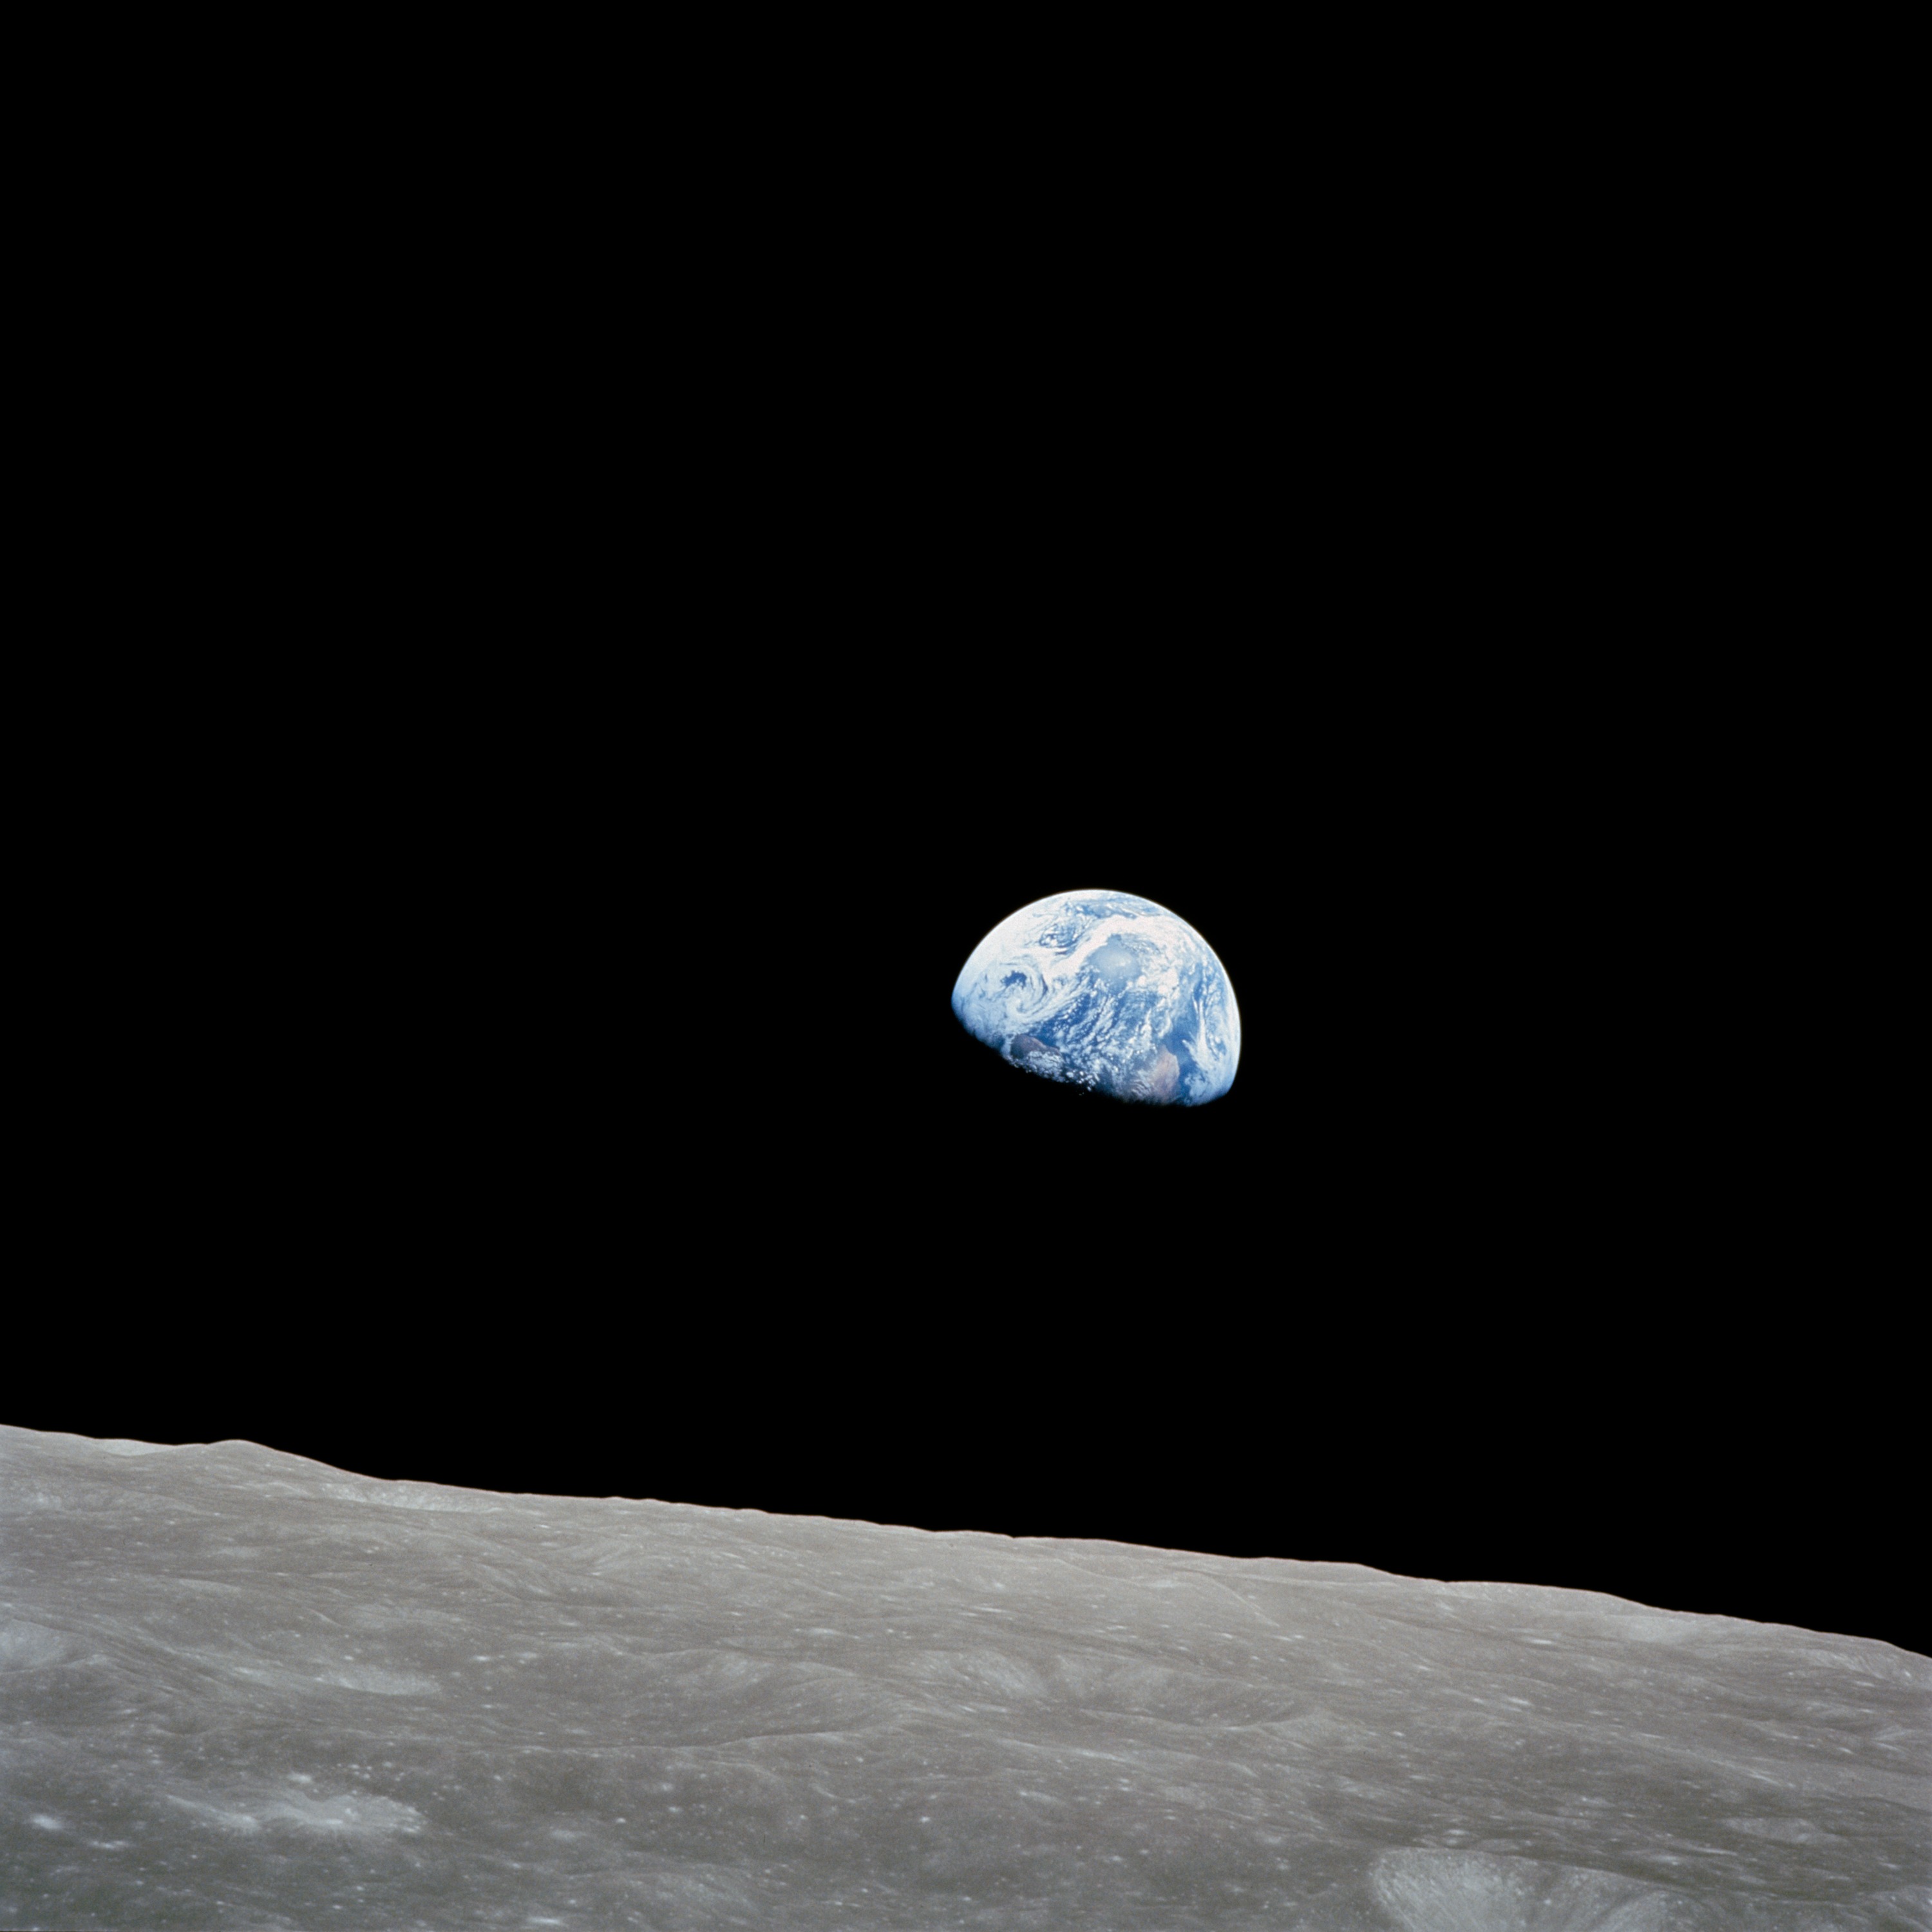 A color photograph of Earth rising over the horizon of the Moon, as seen from the Apollo 8 spacecraft. The Moon's horizon is a dull gray, covering the bottom quarter of the image. Earth, with its blue water and white swirling clouds, is almost at the center of the image. The bottom third of Earth is not visible.